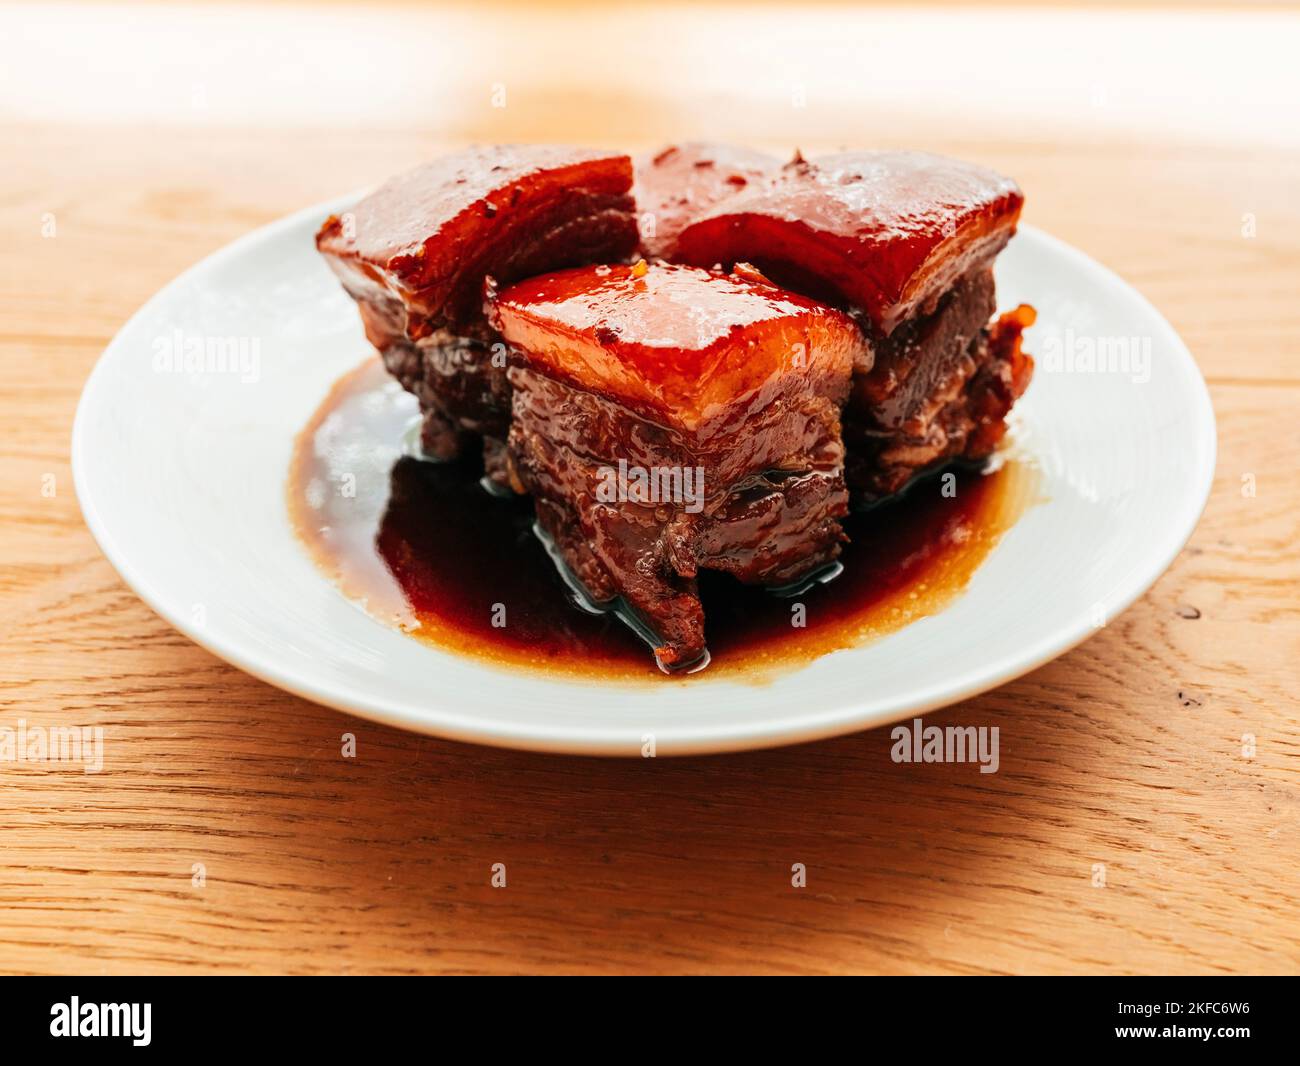 Dongpo pork, also known as Dongpo meat. It's a Hangzhou dish which is made by pan-frying and then red cooking pork belly. Stock Photo